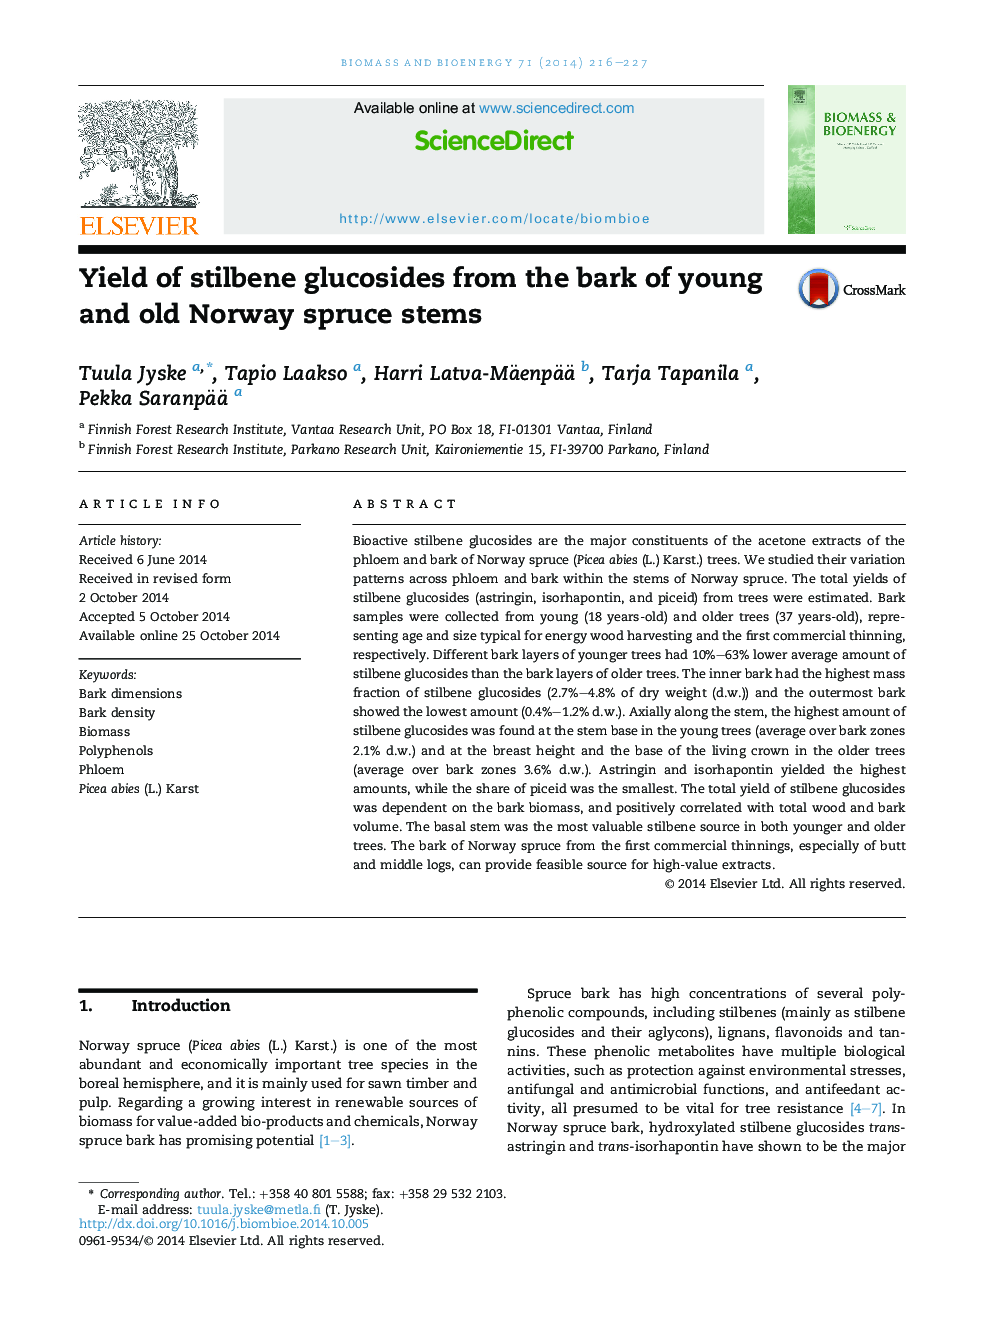 Yield of stilbene glucosides from the bark of young and old Norway spruce stems